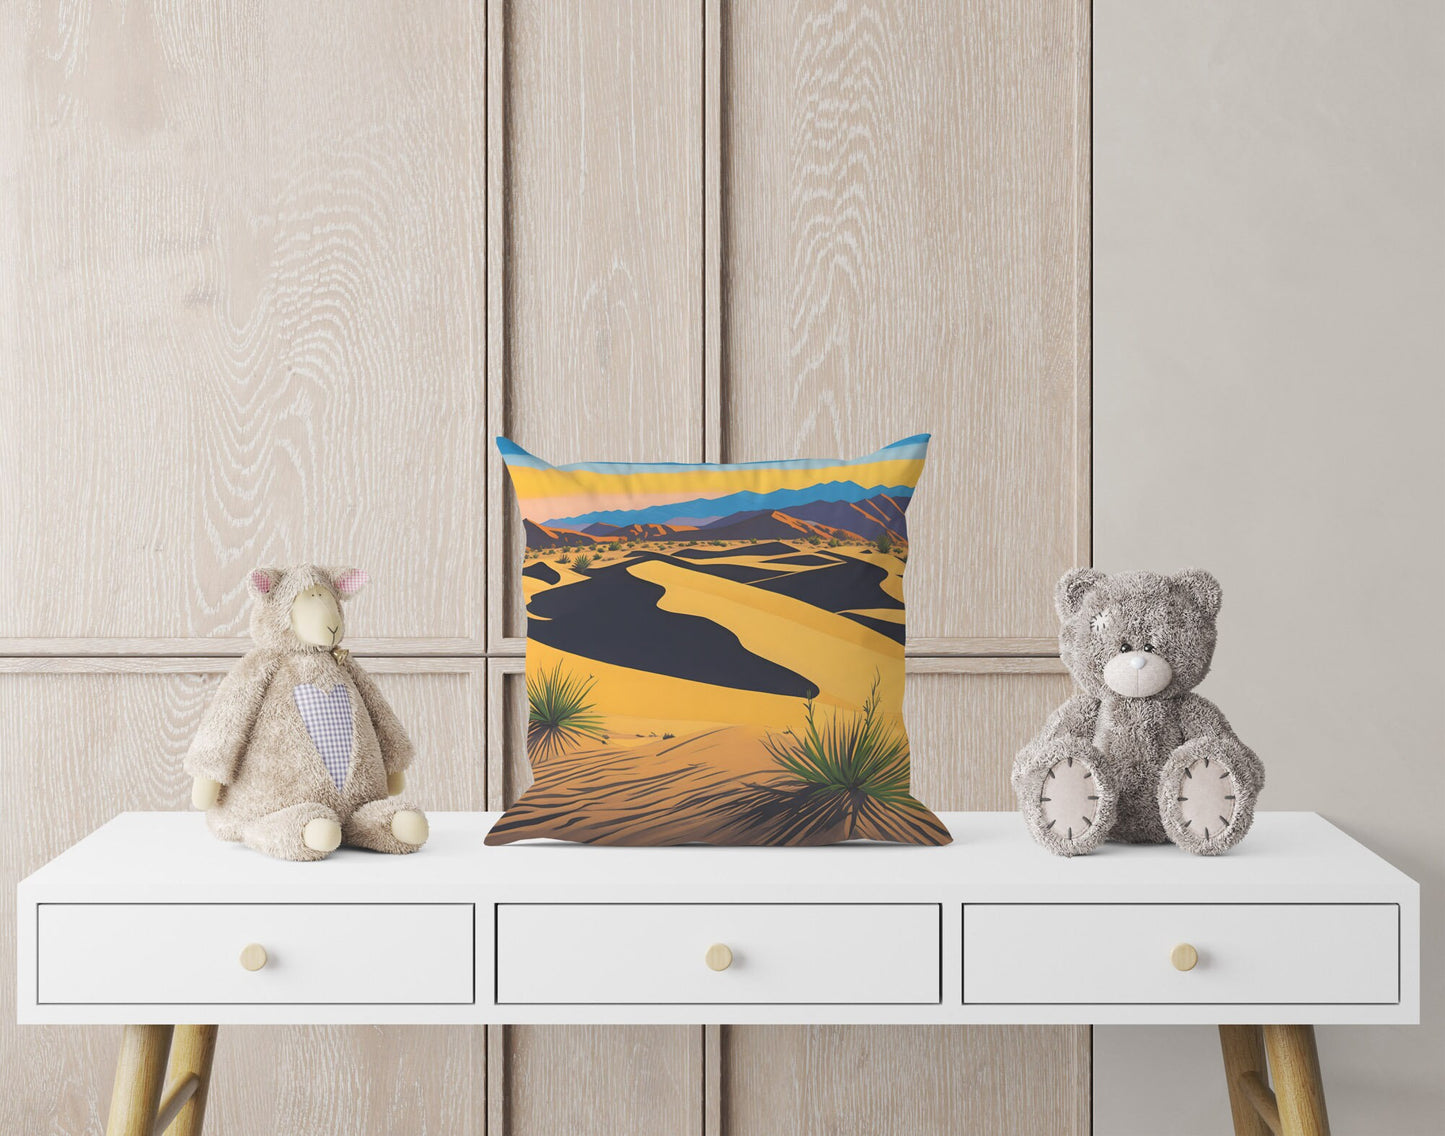 Mesquite Flat Sand Dunes In Death Valley National Park, California Pillow Case, Usa Travel Pillow, 24X24 Pillow Case, Indoor Pillow Cases